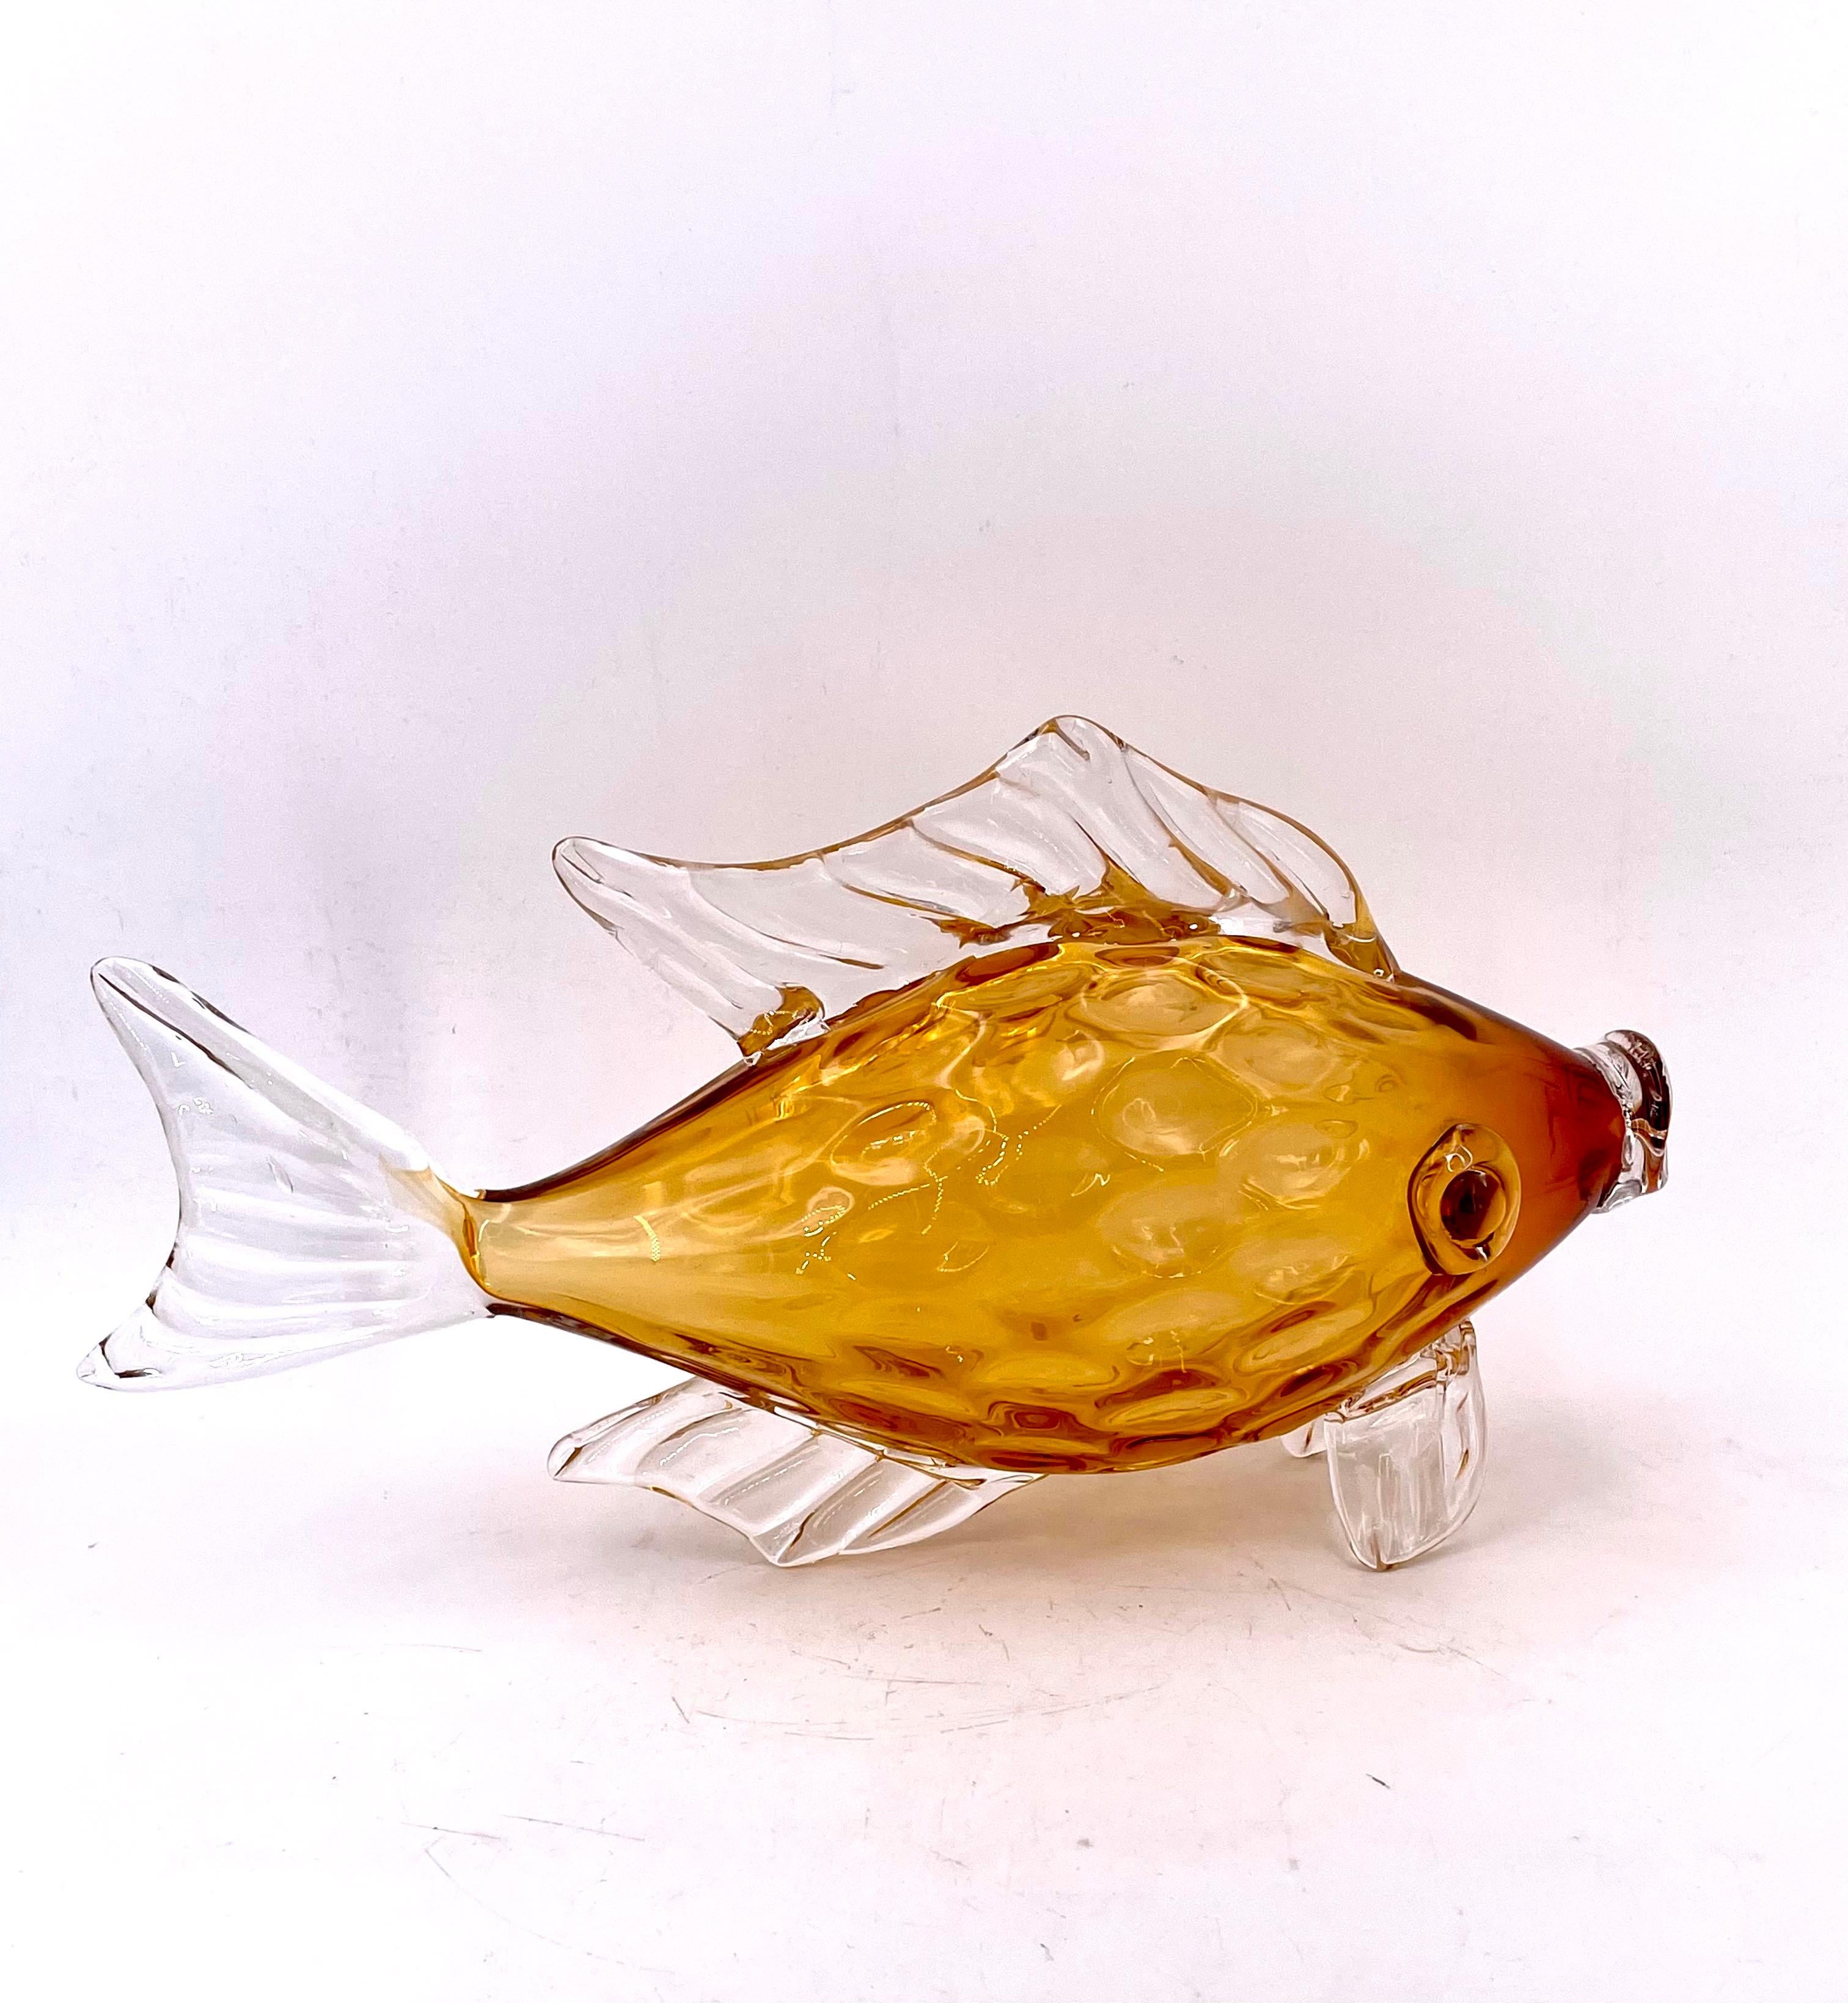 Gorgeous decorative Italian Murano GlassFish, circa 1950's with amber body and clear fins, great condition nice size and weight, remanence of the Iconic Blenko glass Fish.